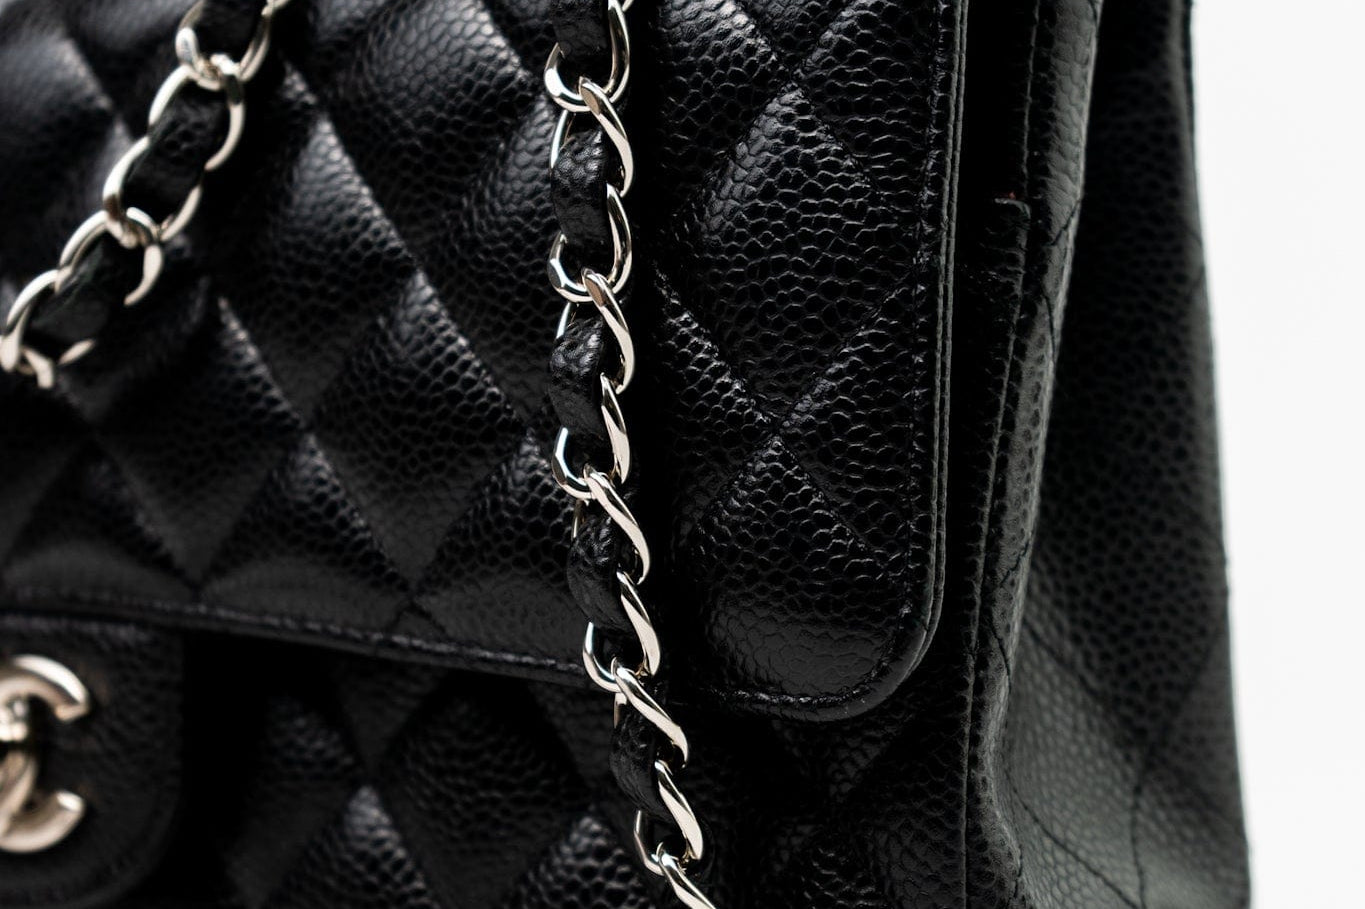 CHANEL Handbag Black Classic Flap Medium Caviar Quilted Silver Hardware - Redeluxe